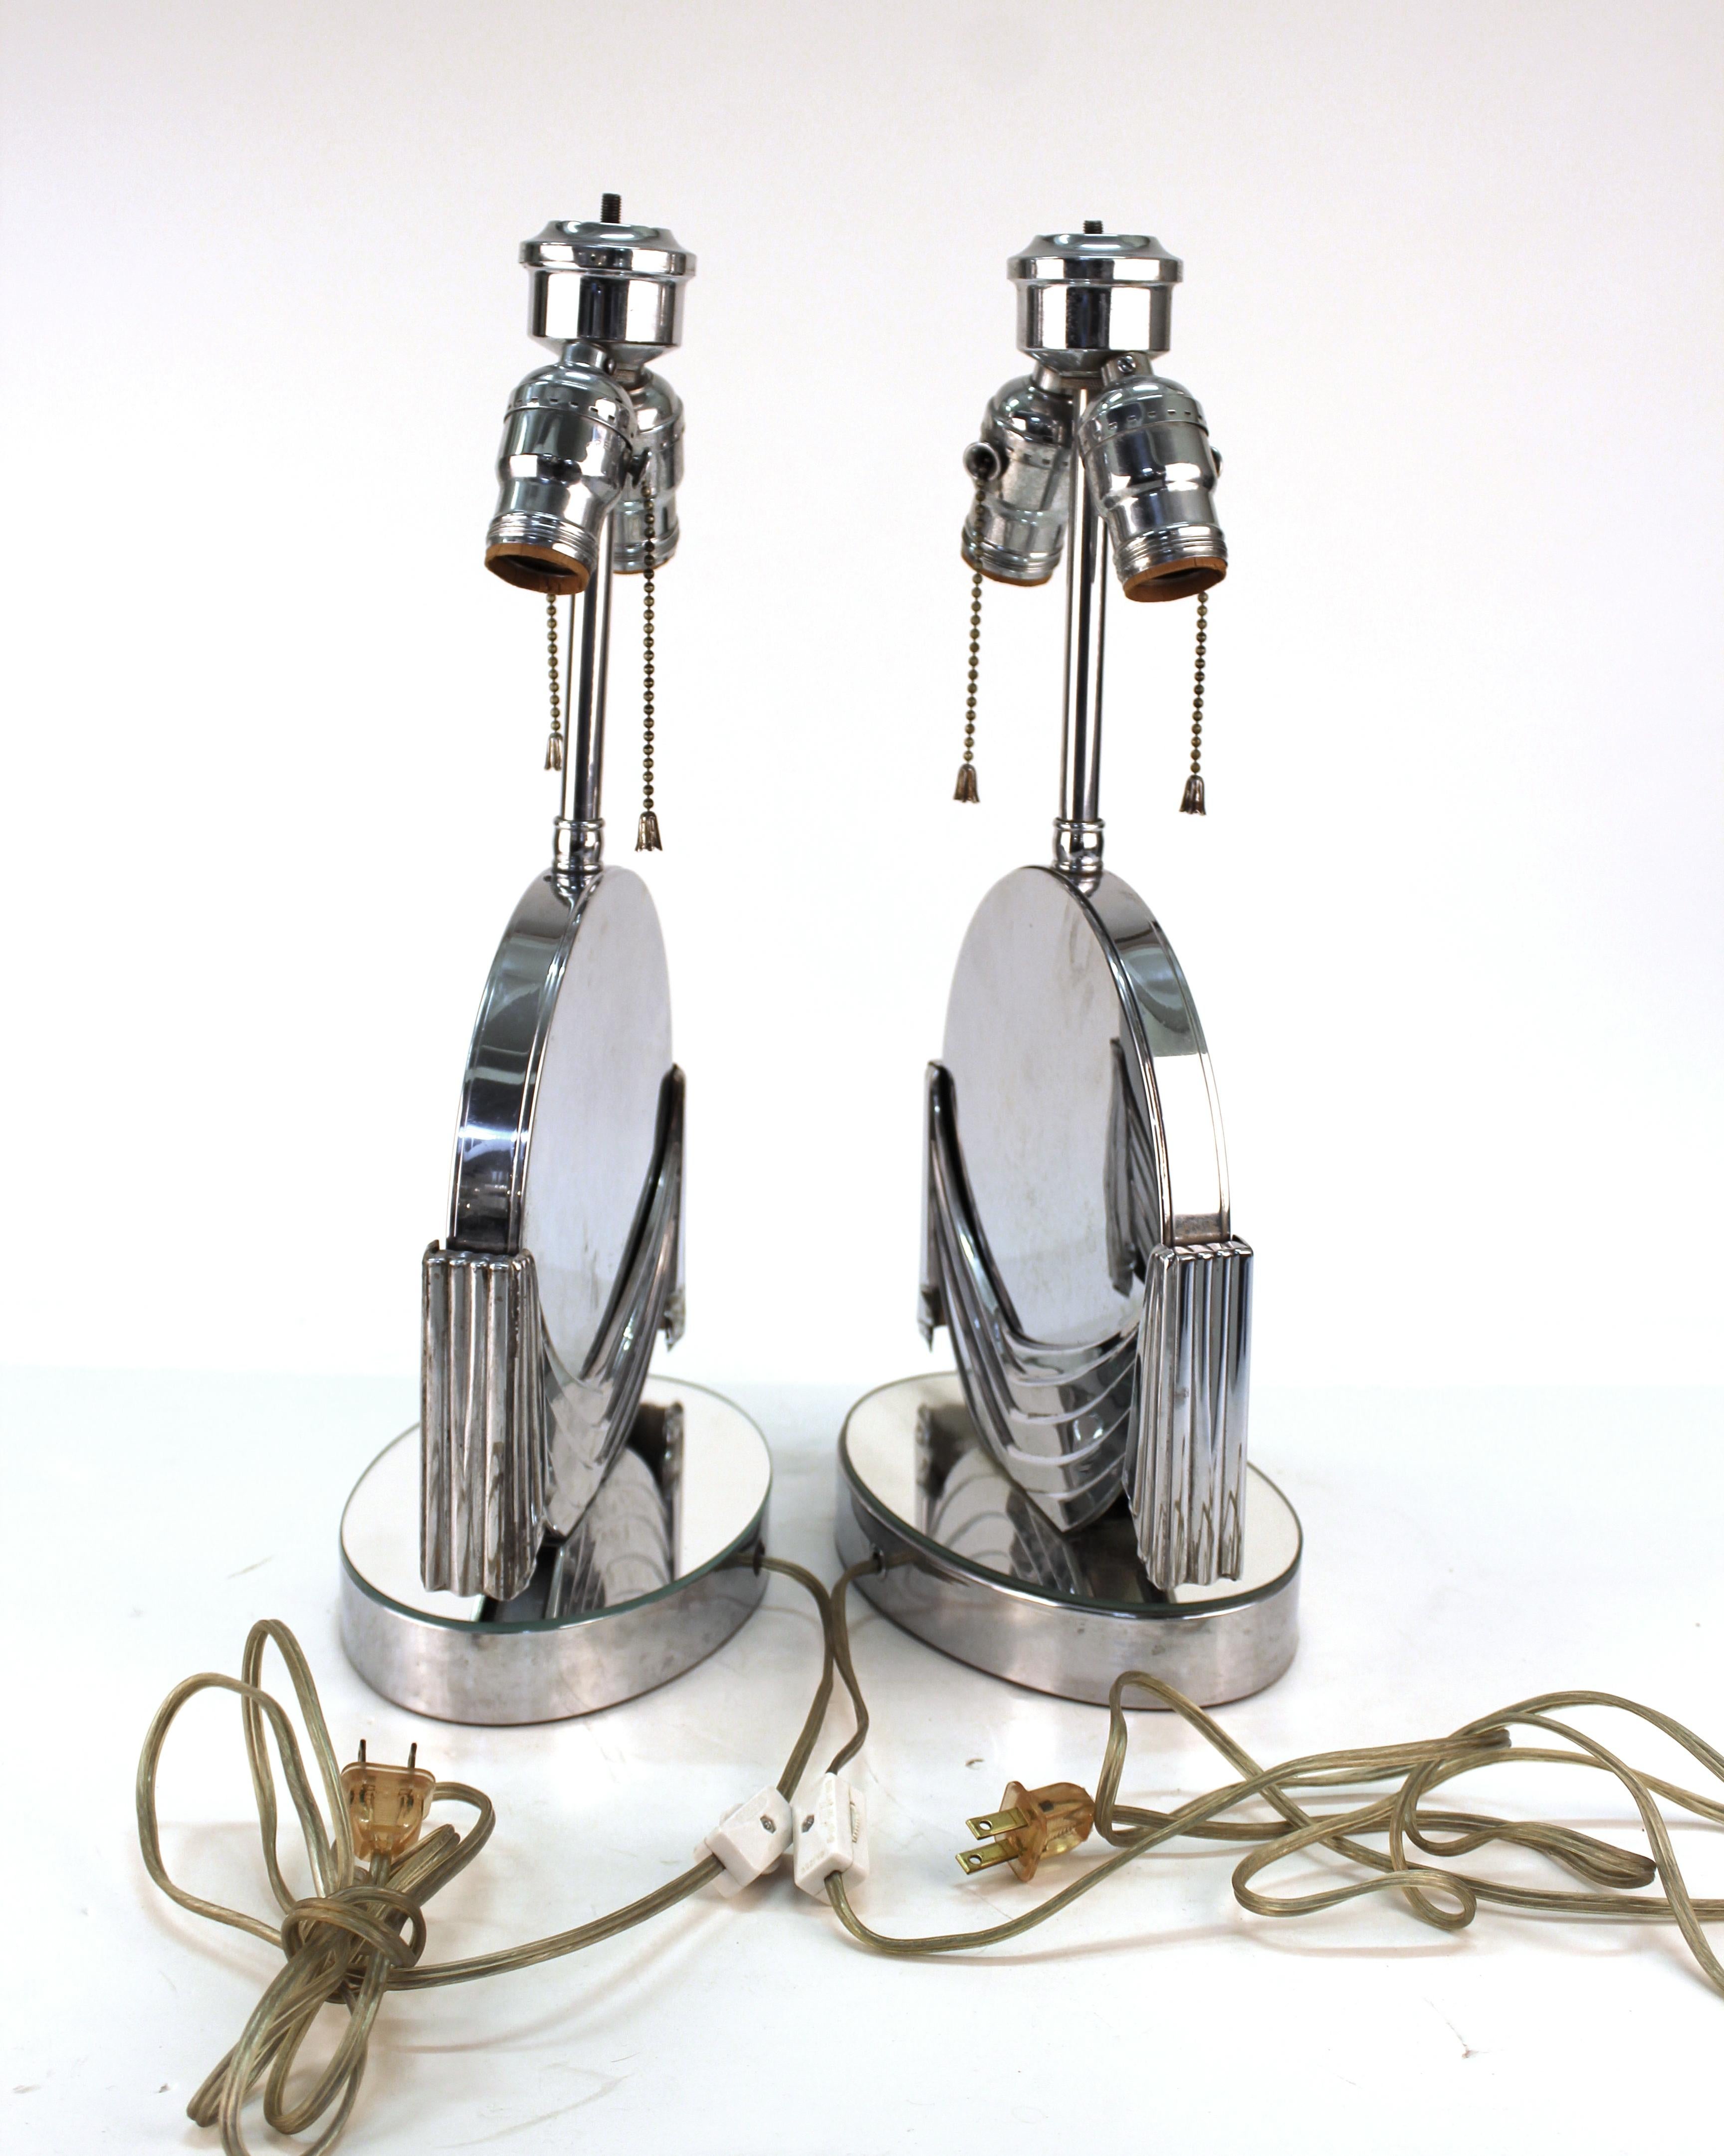 Art Deco Table Lamps with Mirrored Surfaces 1